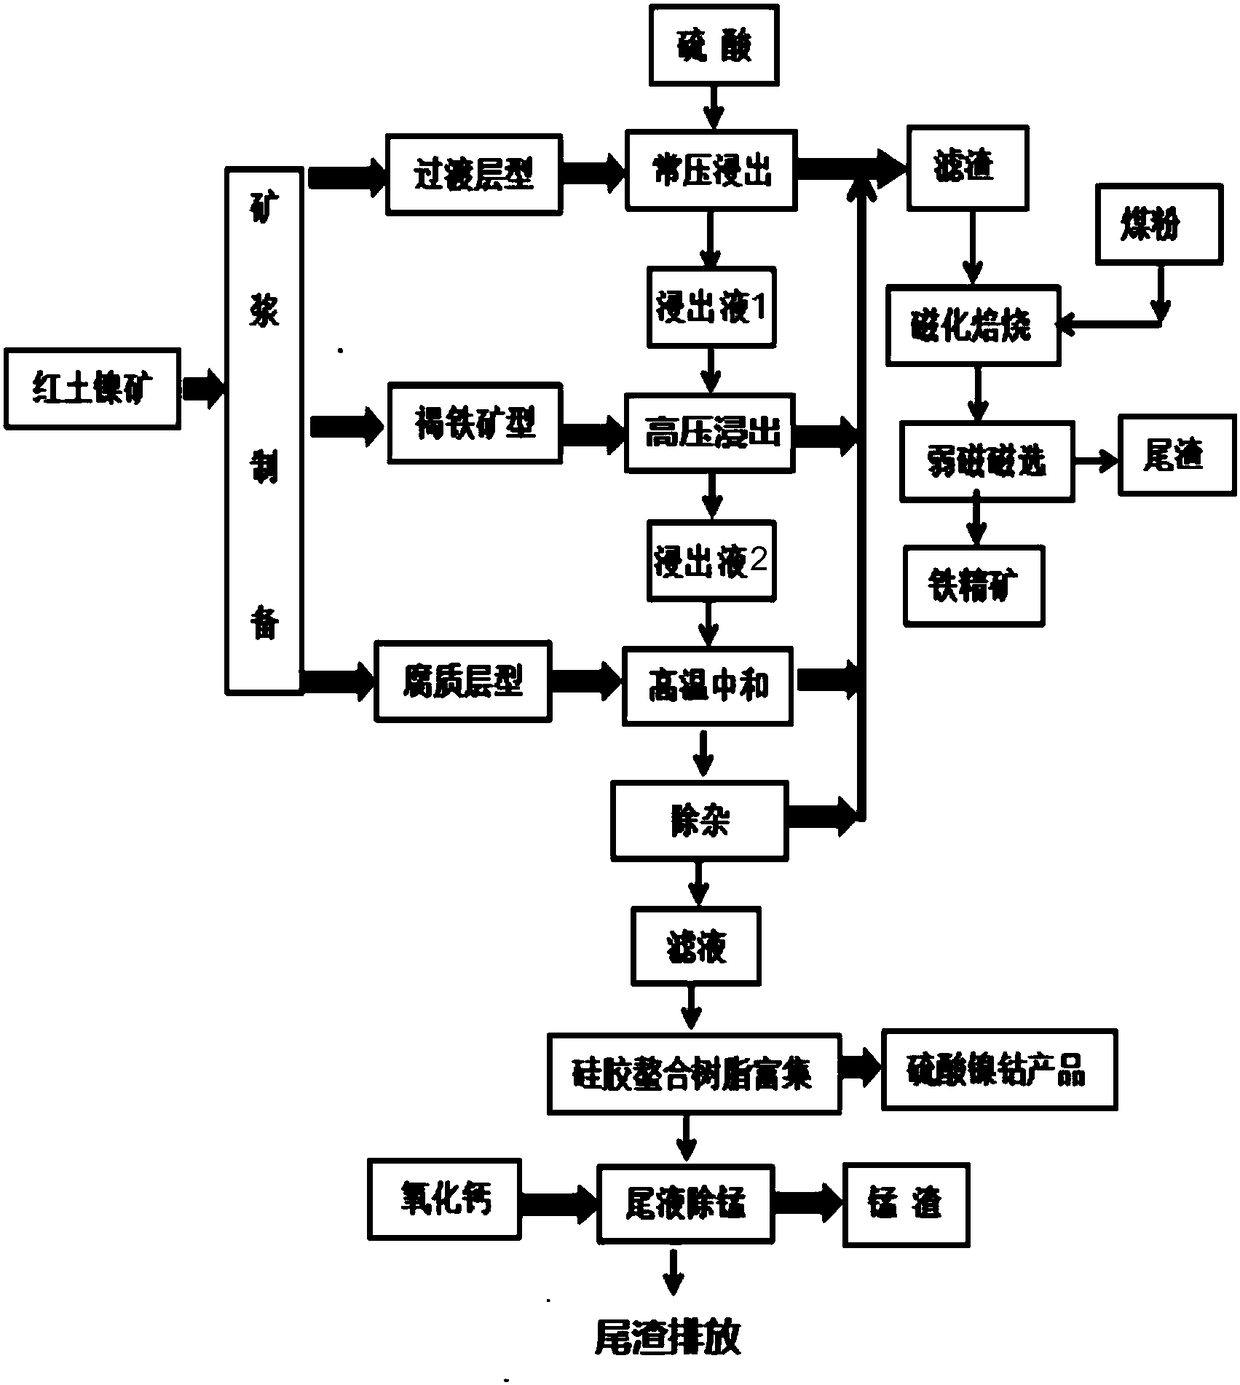 Method for producing nickel sulfate and cobaltous sulfate through purification of laterite nickel ore sulfuric acid leaching solution and silica gel chelate resin